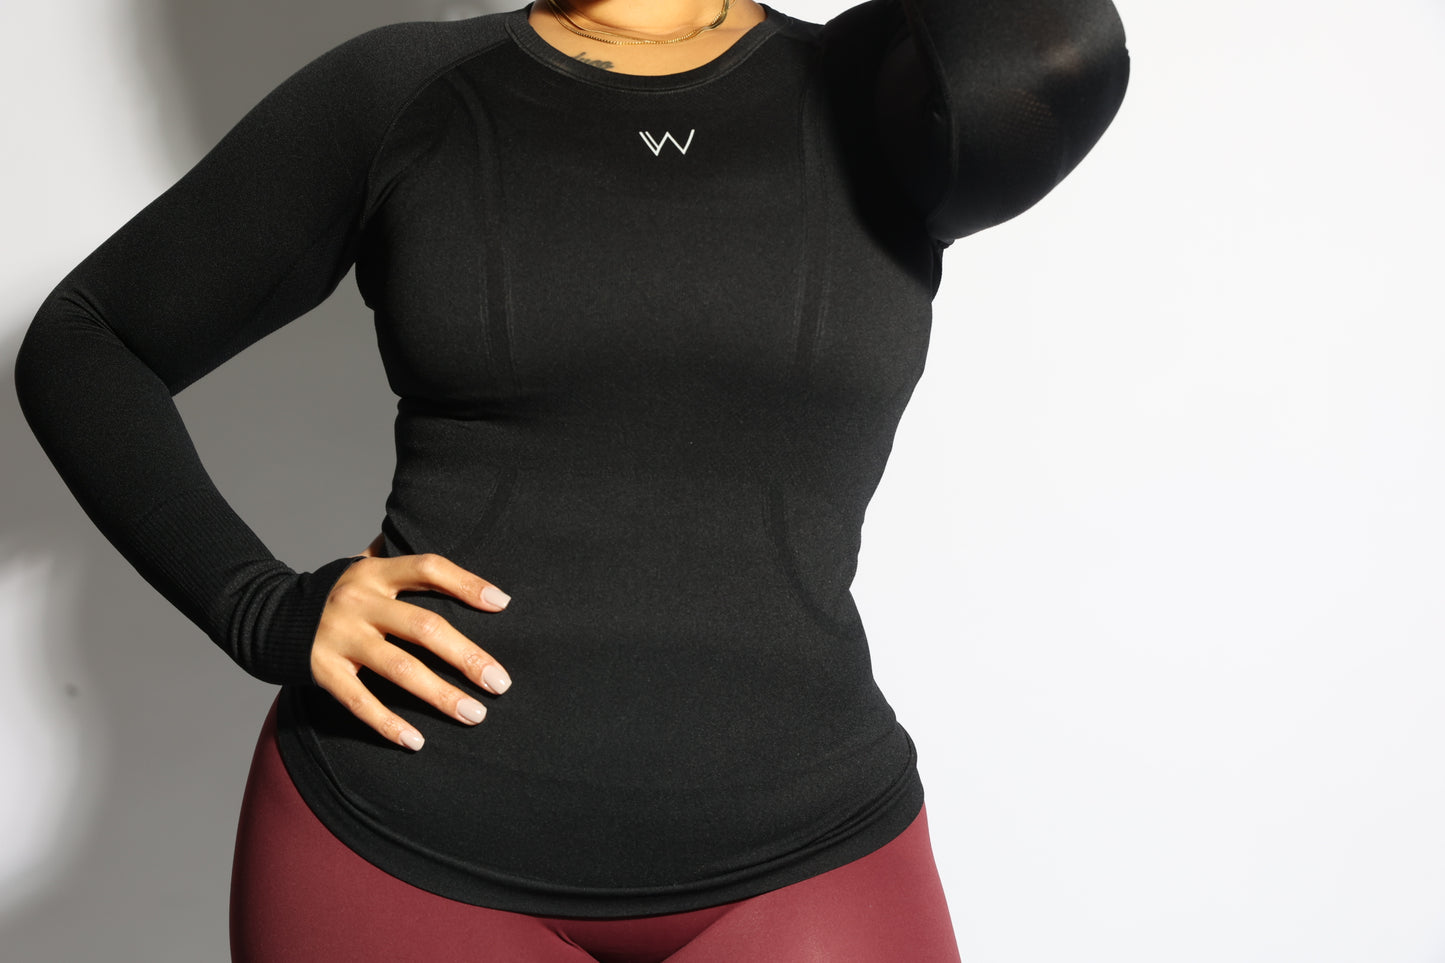 Reese Performance Knit Top - Onyx